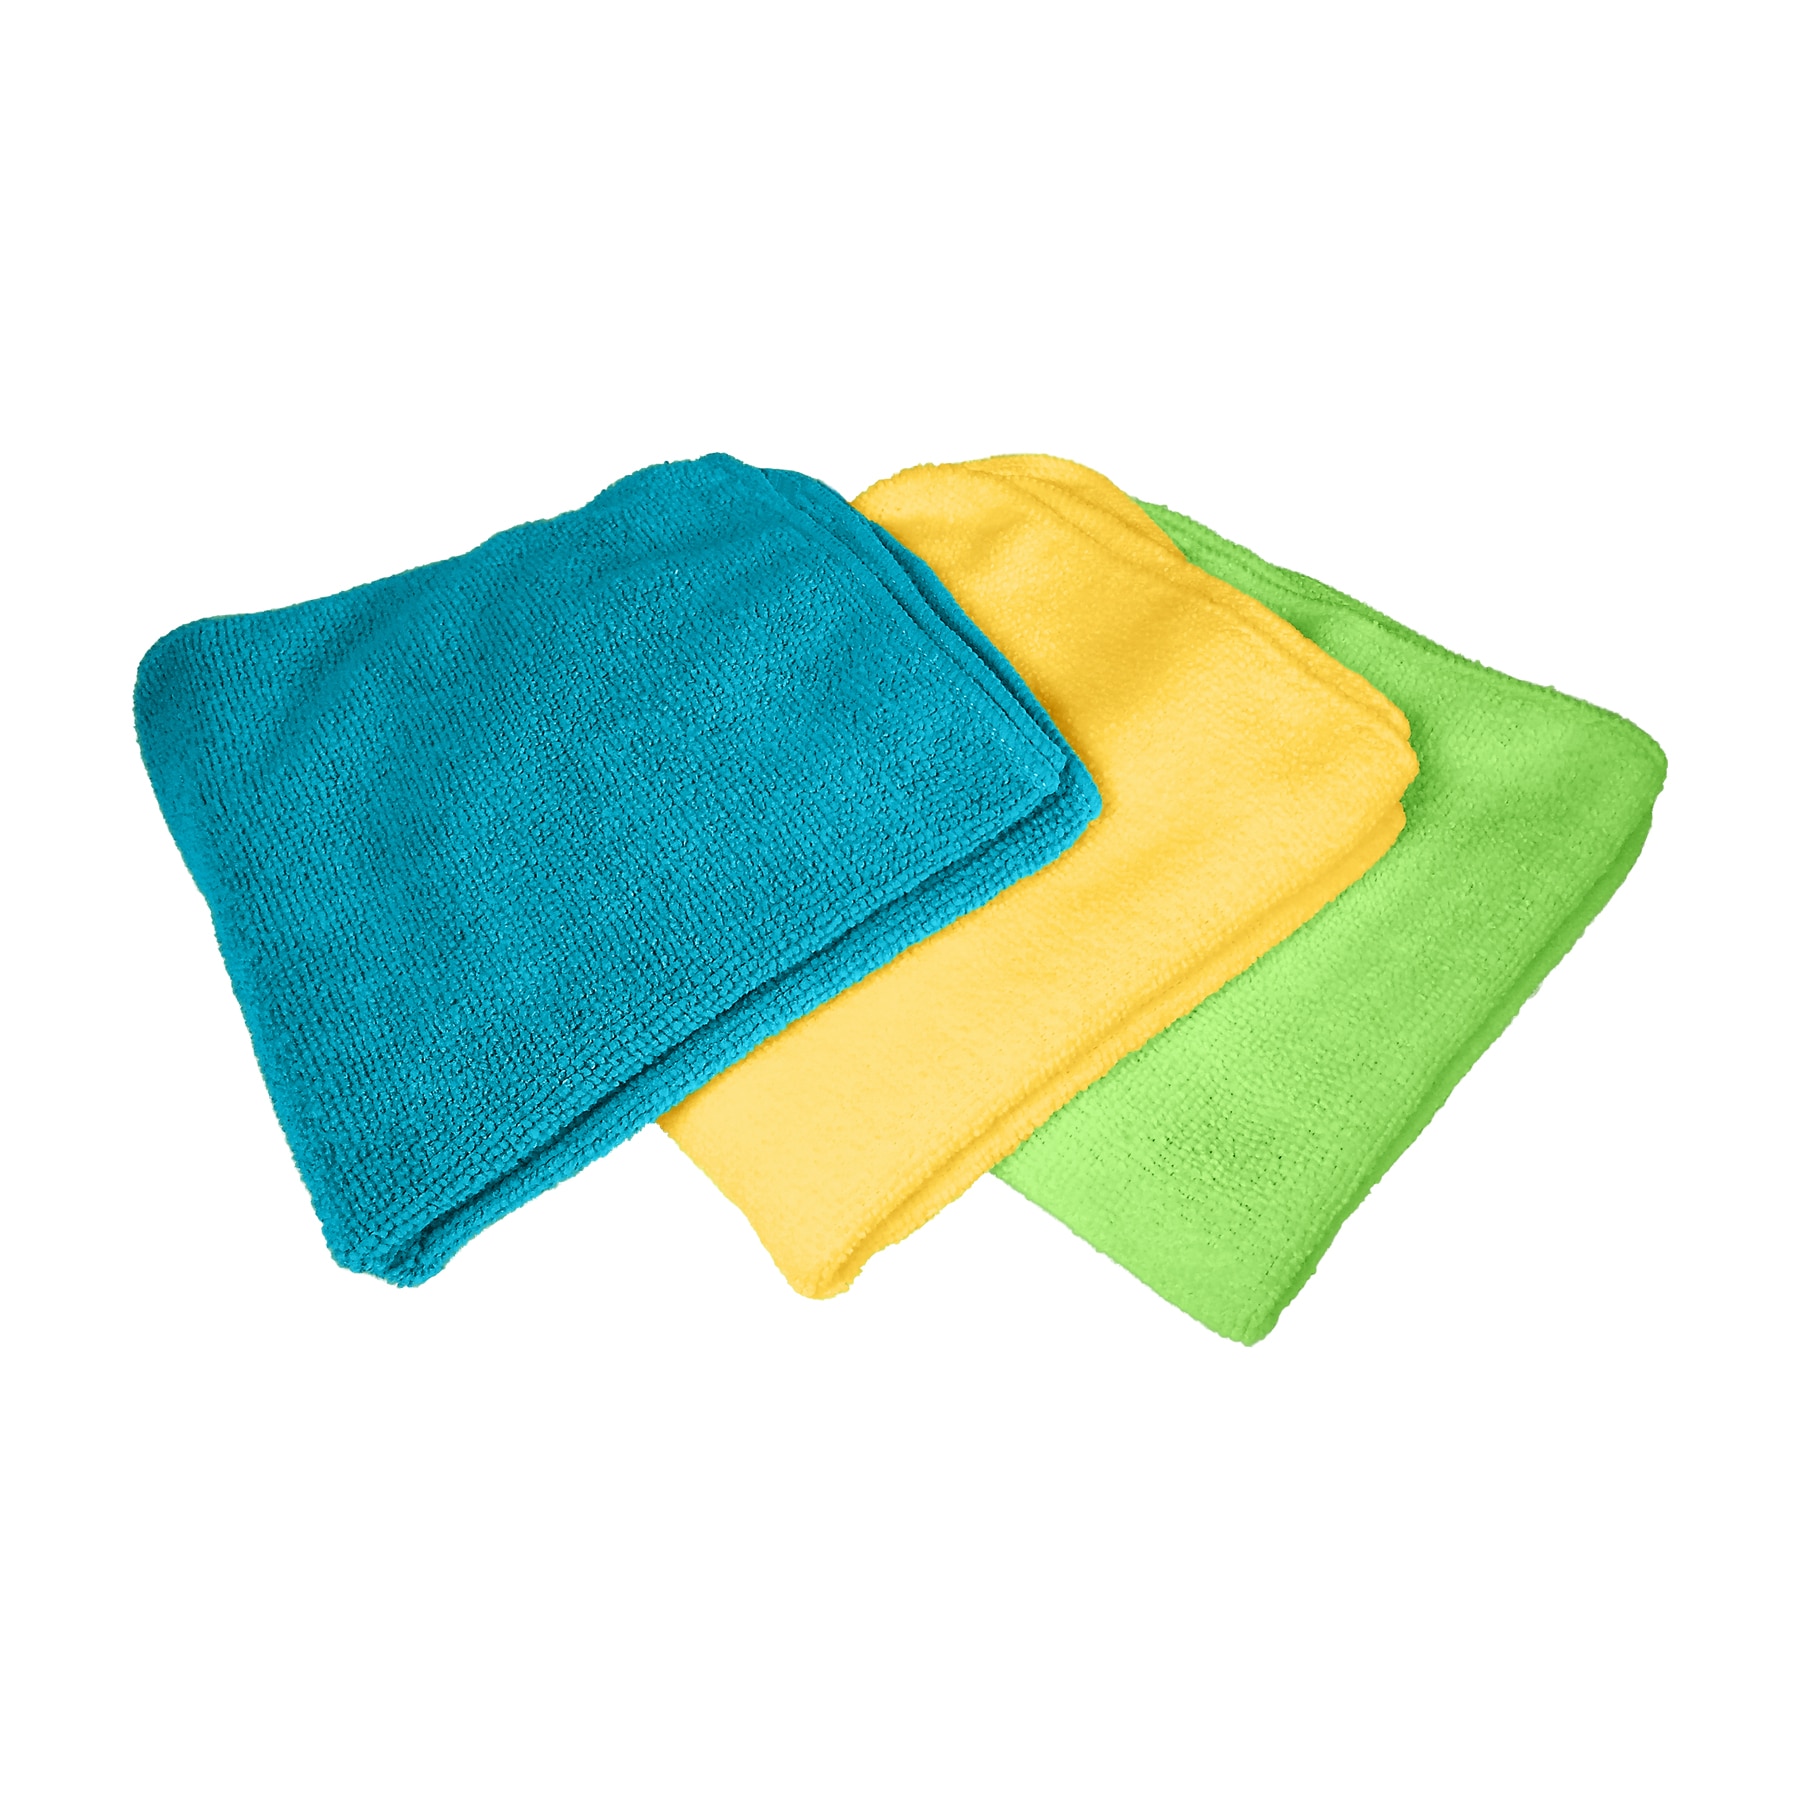 Quickie Microfiber Cleaning Cloth, 14 X 14 in., Blue, 24 Pack, Washable and  Reusable, All-Purpose Towel/Wiper for Multi-Purpose Indoor/Outdoor